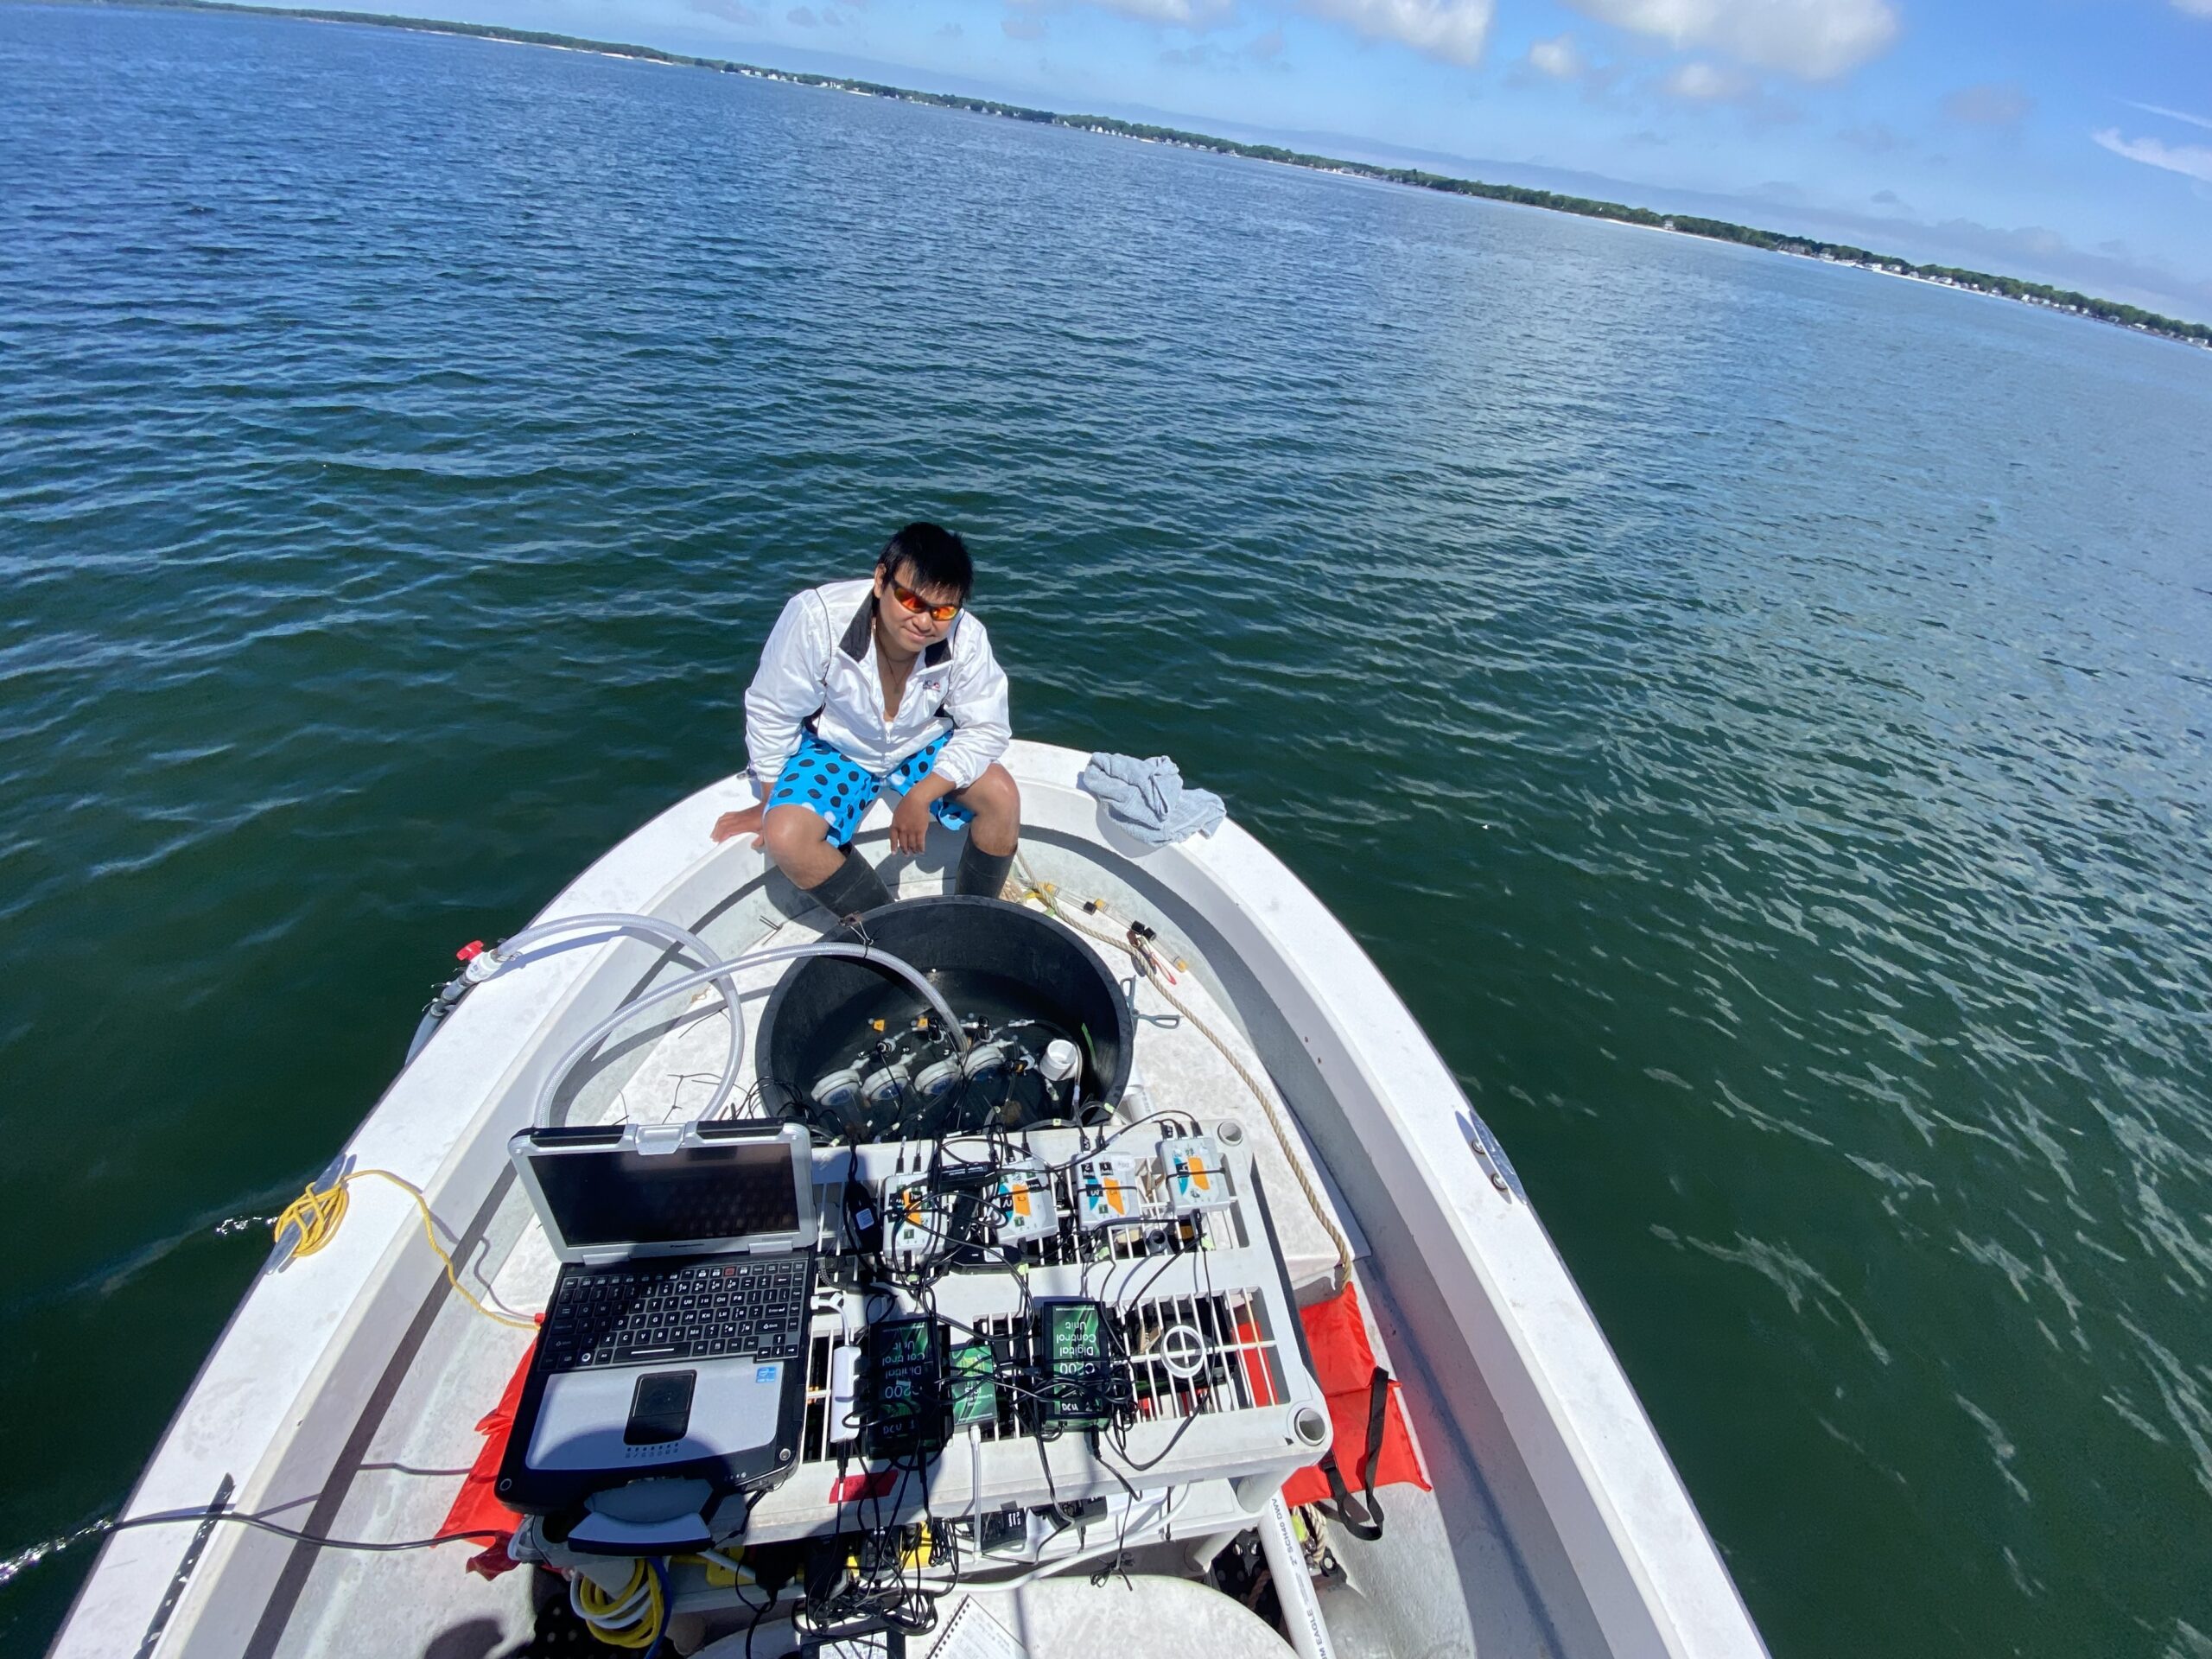 Stony Brook researcher Lucas Wong with the field laboratory equipment he and research partner Jessica MacGregor use to study the respiration of bay scallops in the Peconics to gauge how much physiological stress they are experiencing from various environmental factors.